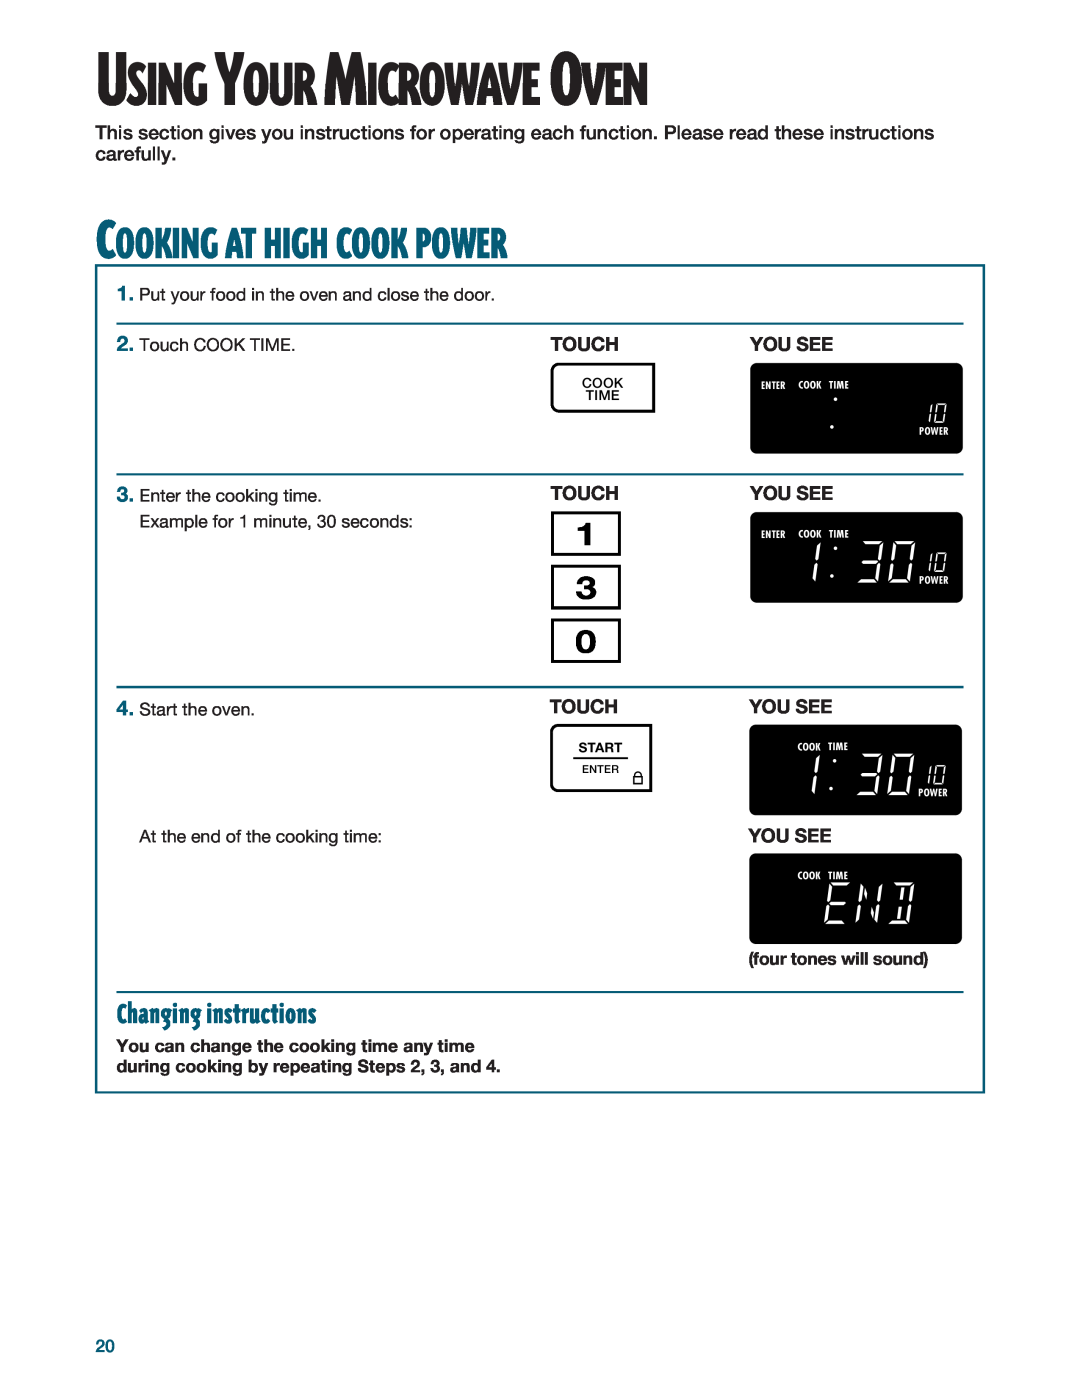 Whirlpool MH6140XF Cooking At High Cook Power, Changing instructions, You See, Touch, Start the oven, Cook Time, Enter 